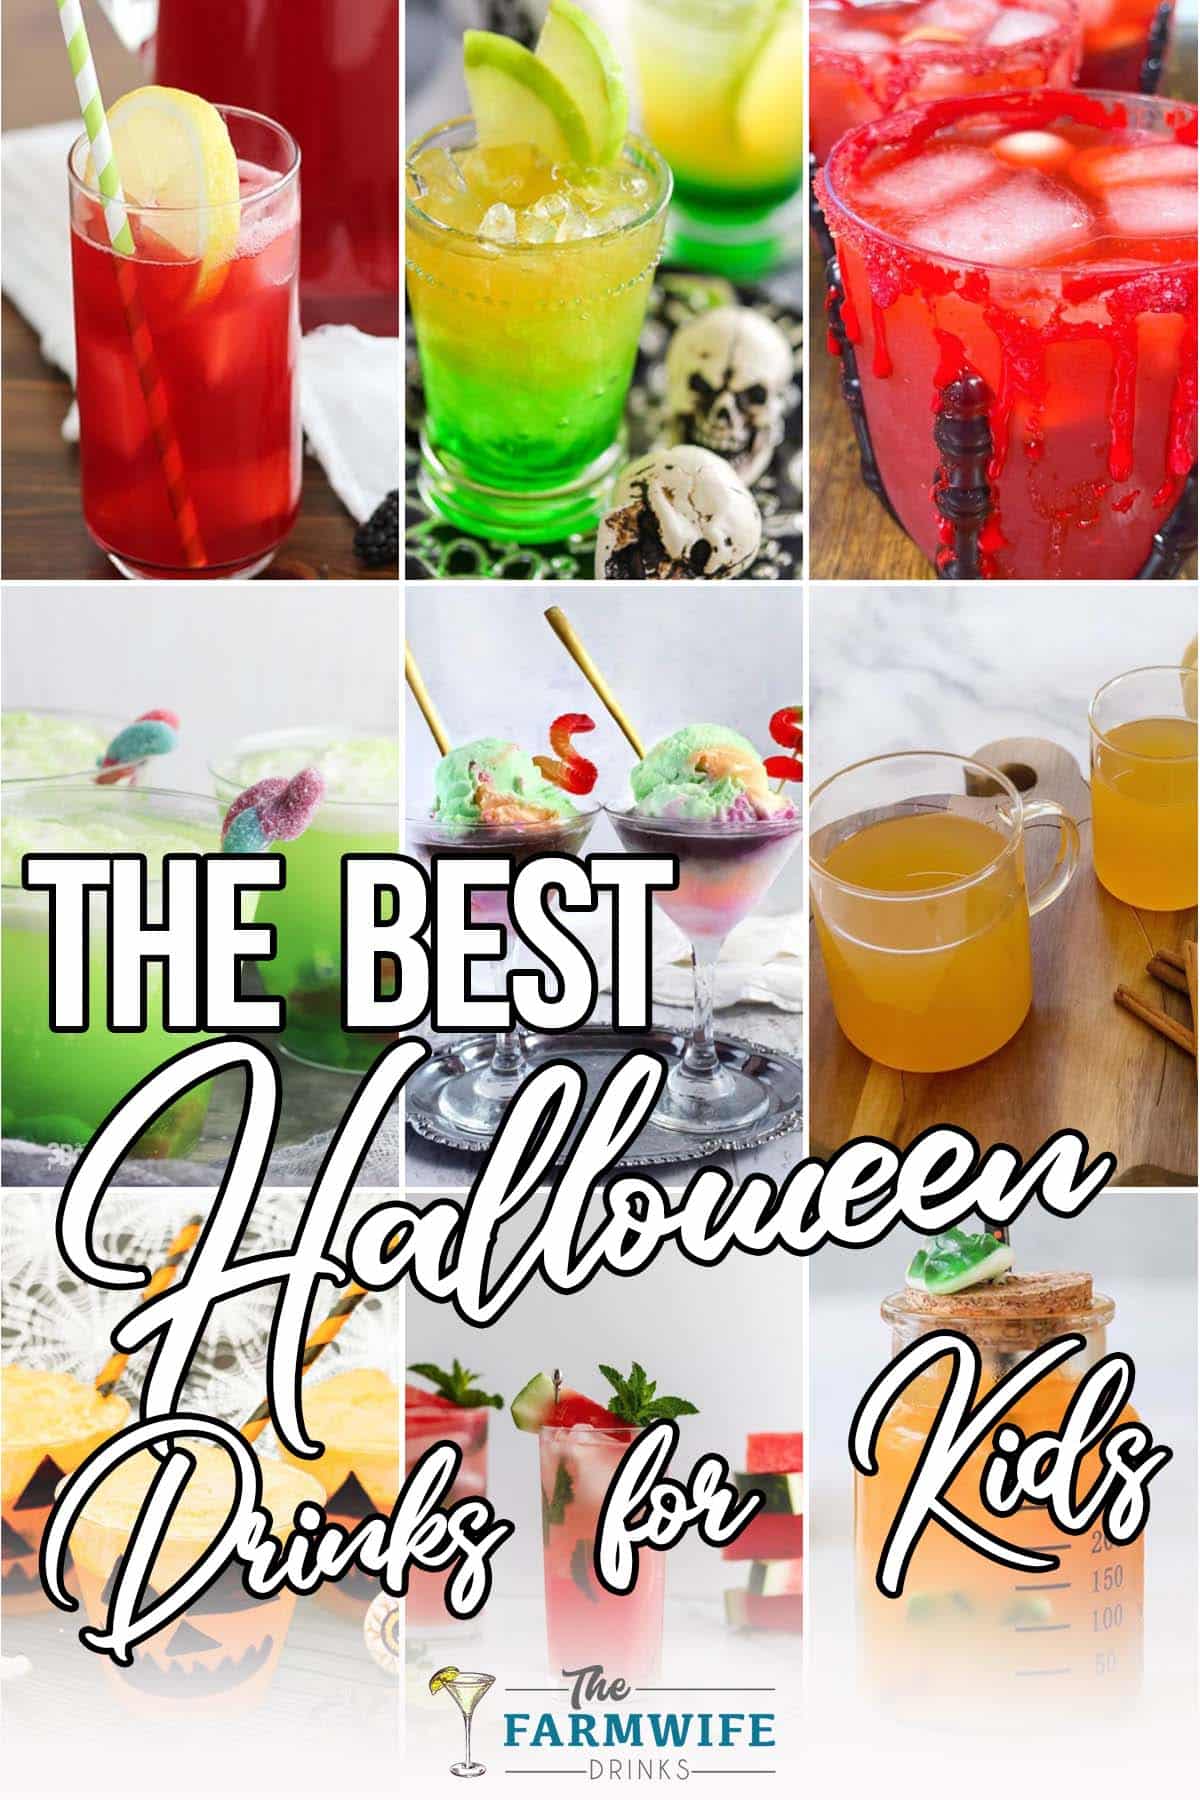 photo collage of kids halloween drinks with text which reads the best halloween drinks for kids